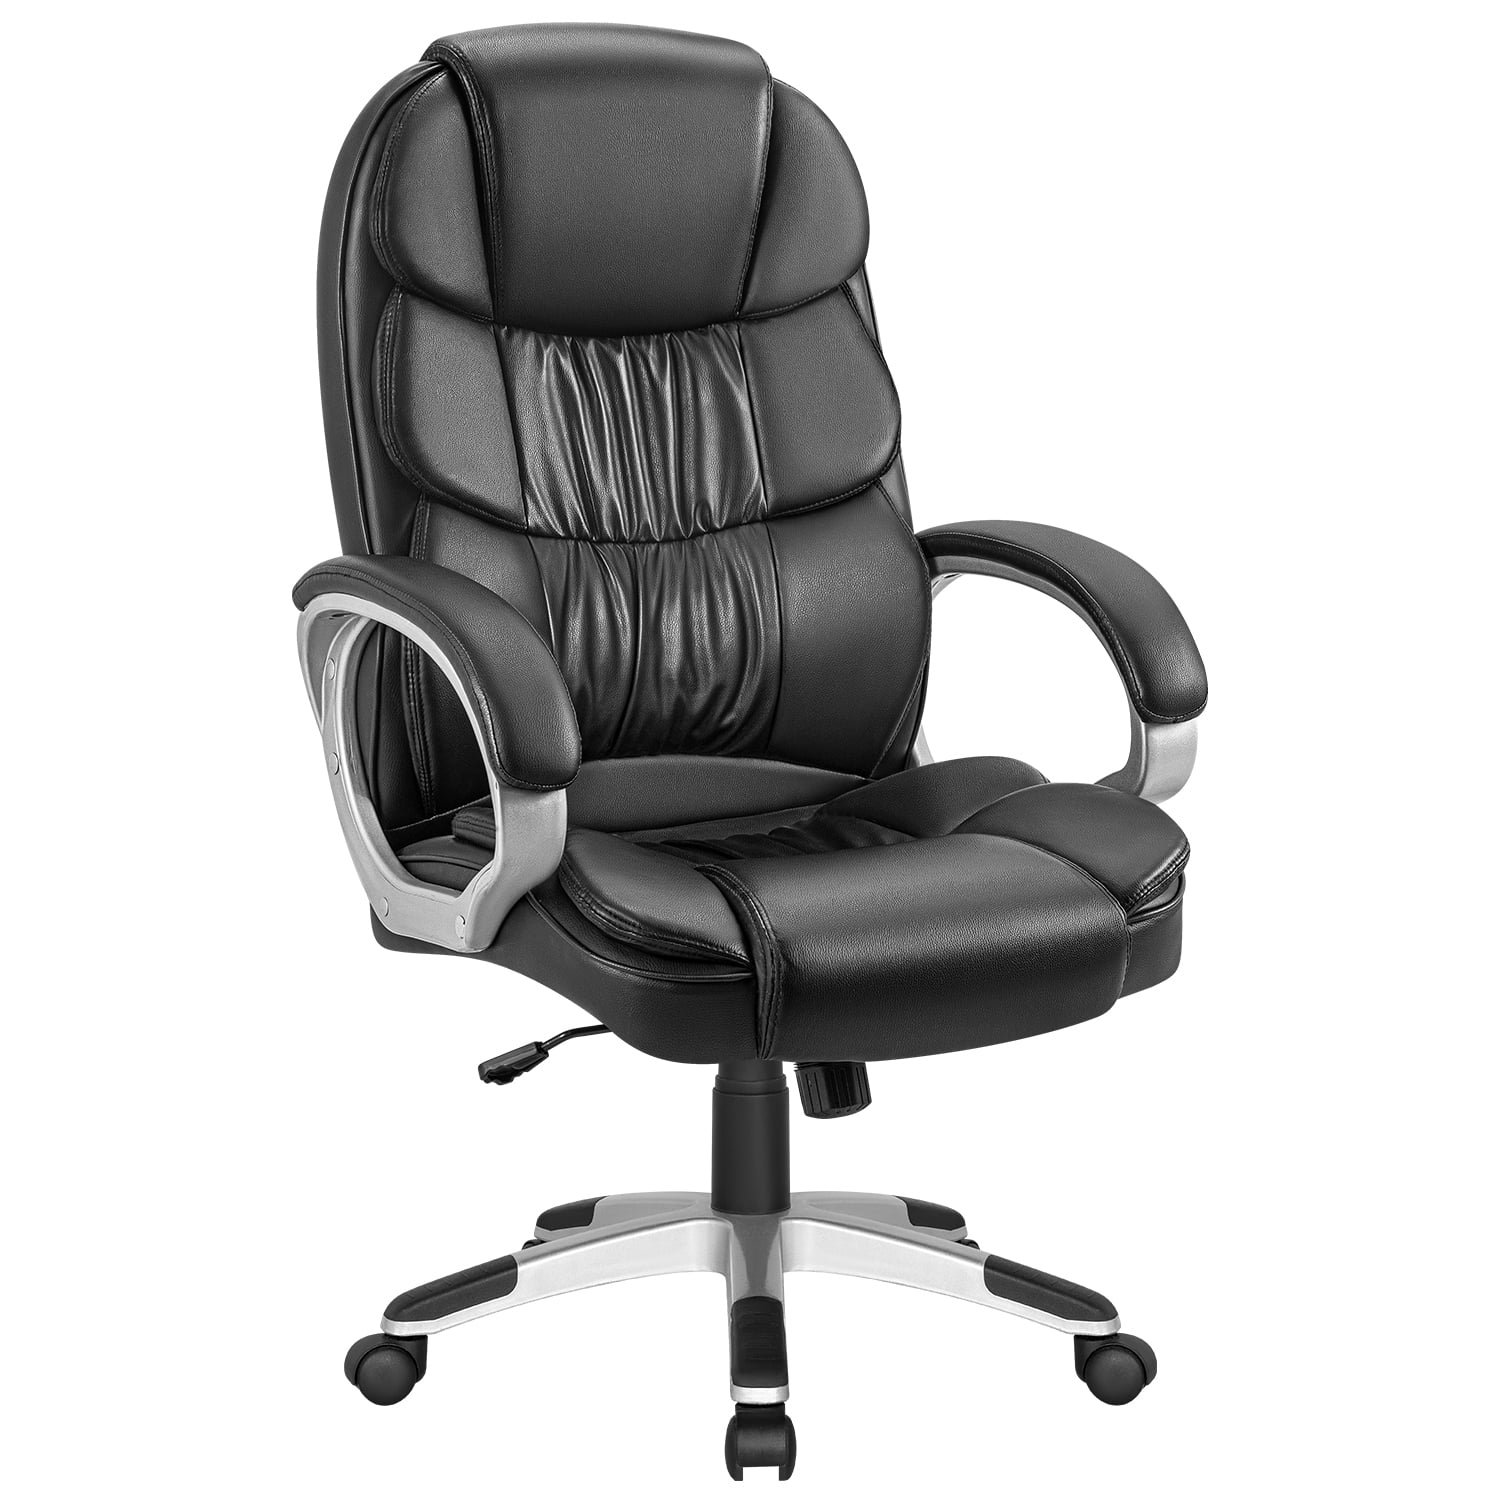 Black Furmax High Back Big and Tall Office Exectuive Chair,Adjustable Managerial Desk Chair,Swivel Computer PU Leather Chair for Heavy People 